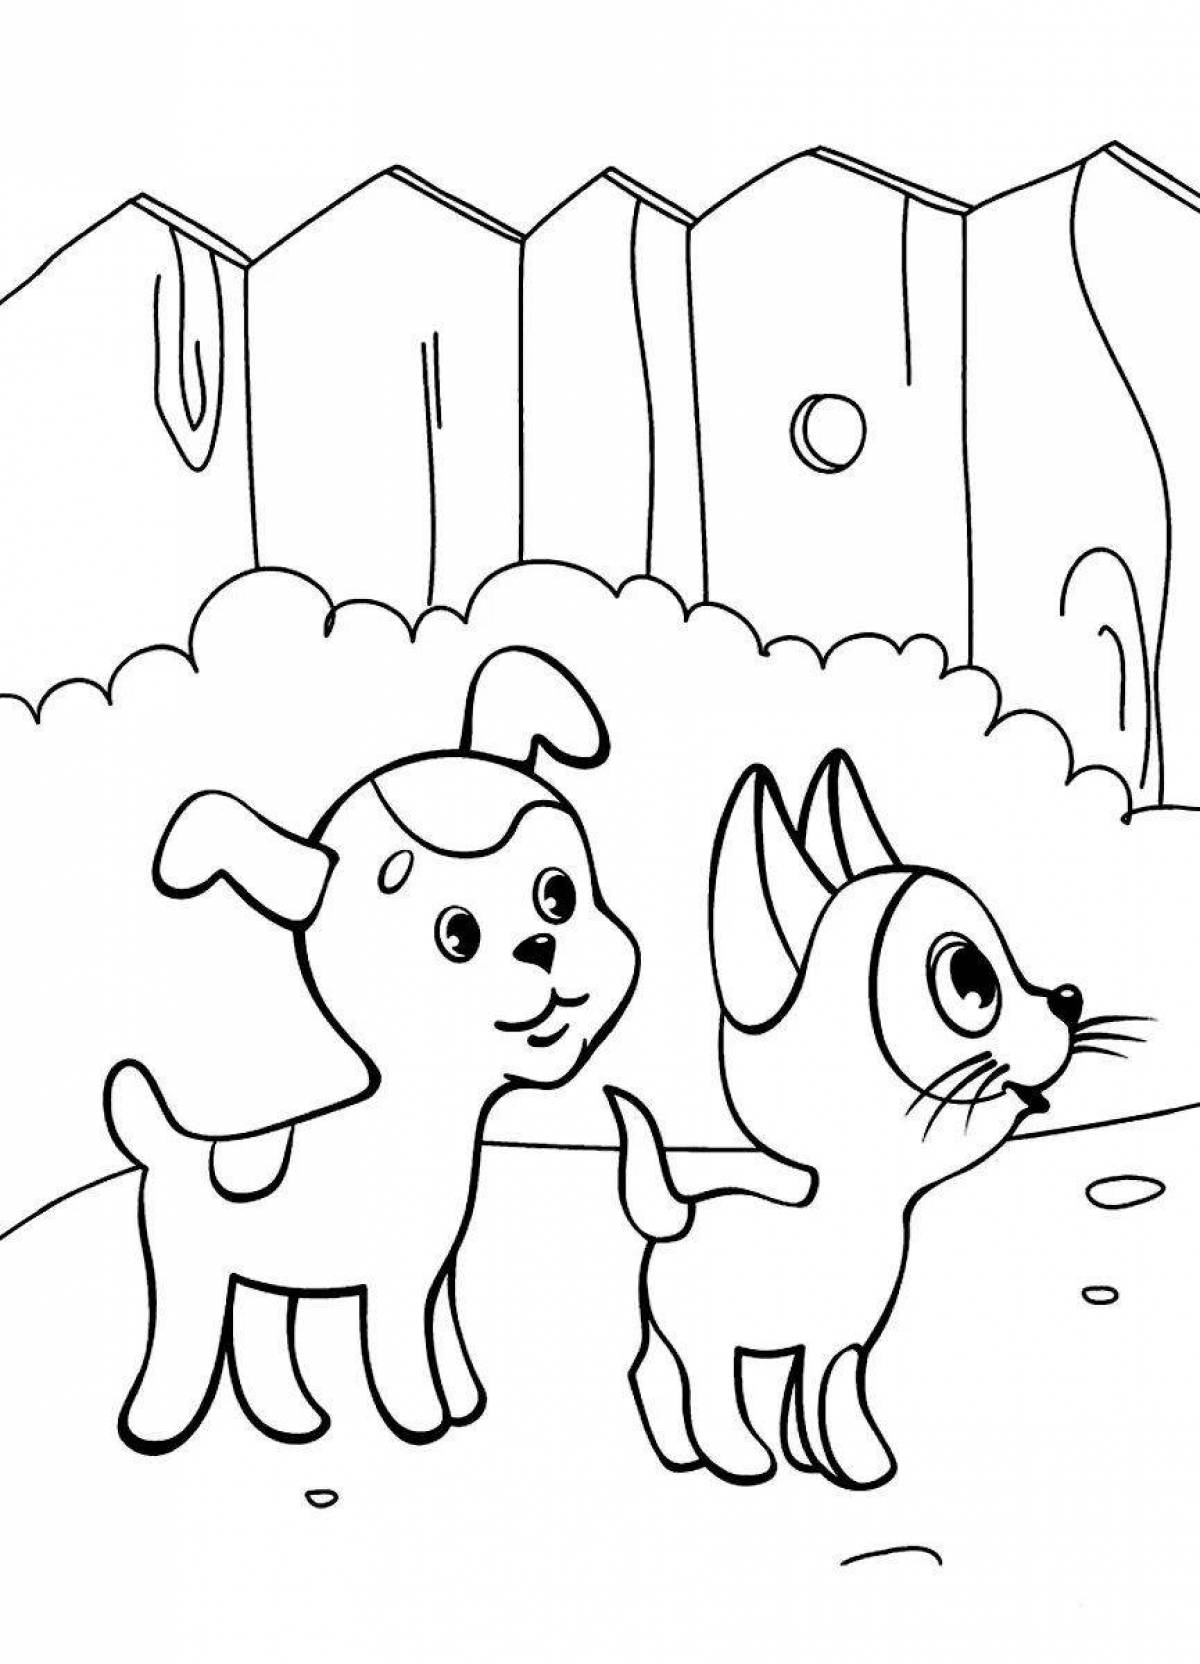 Coloring book sunny kitten and dog